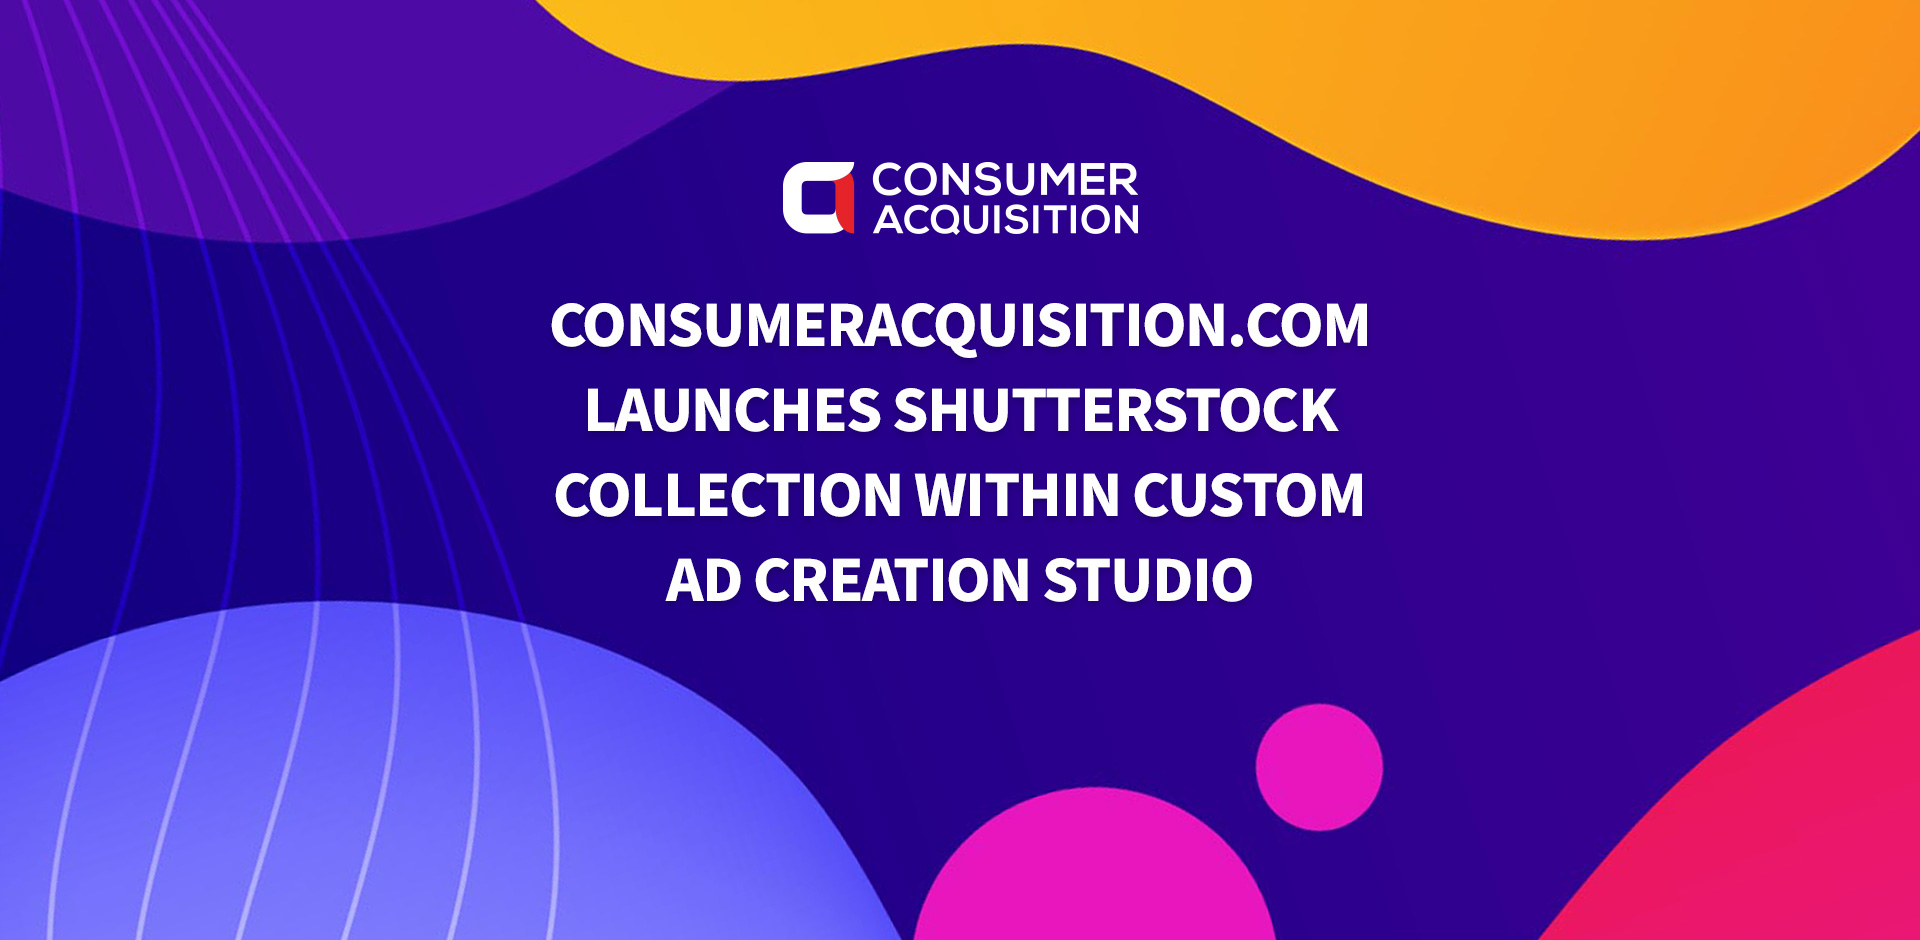 ConsumerAcquisition.com Launches Shutterstock Collection Within Custom Ad Creation Studio